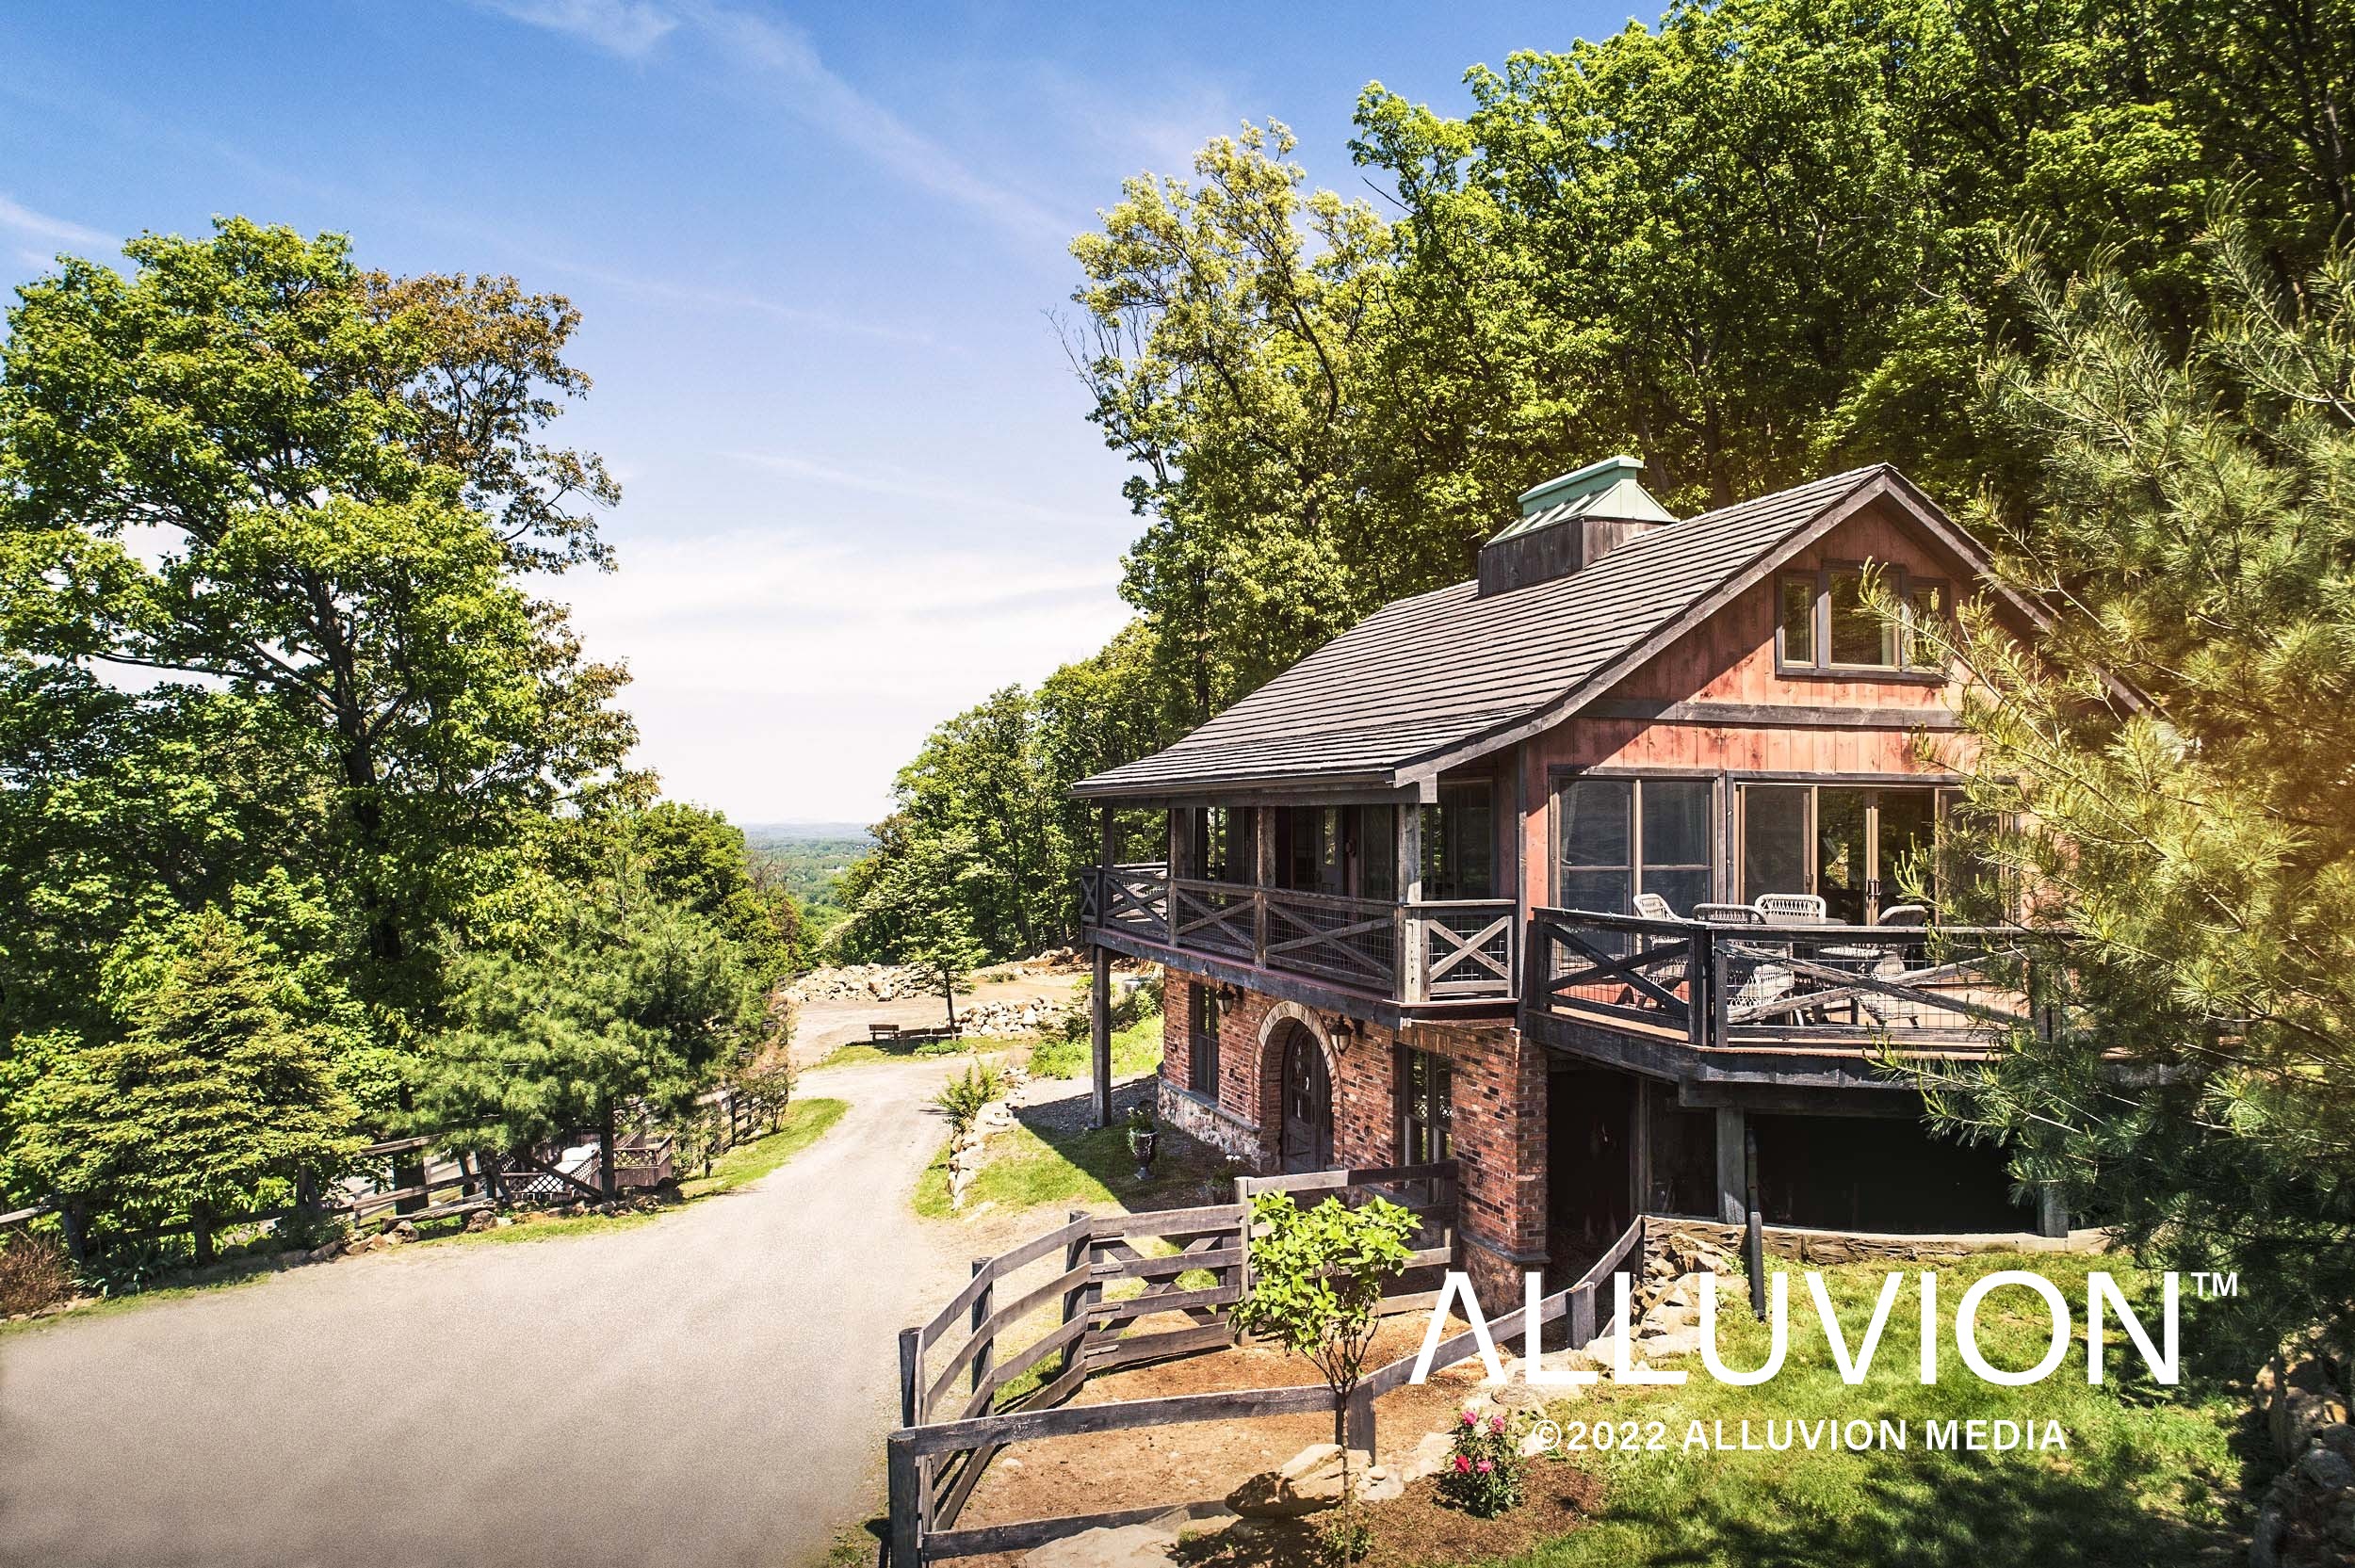 Lambs Hill, Beacon, NY – Equestrian Airbnb Listing Photography for the Hudson Valley Style Magazine – Photography by Maxwell Alexander